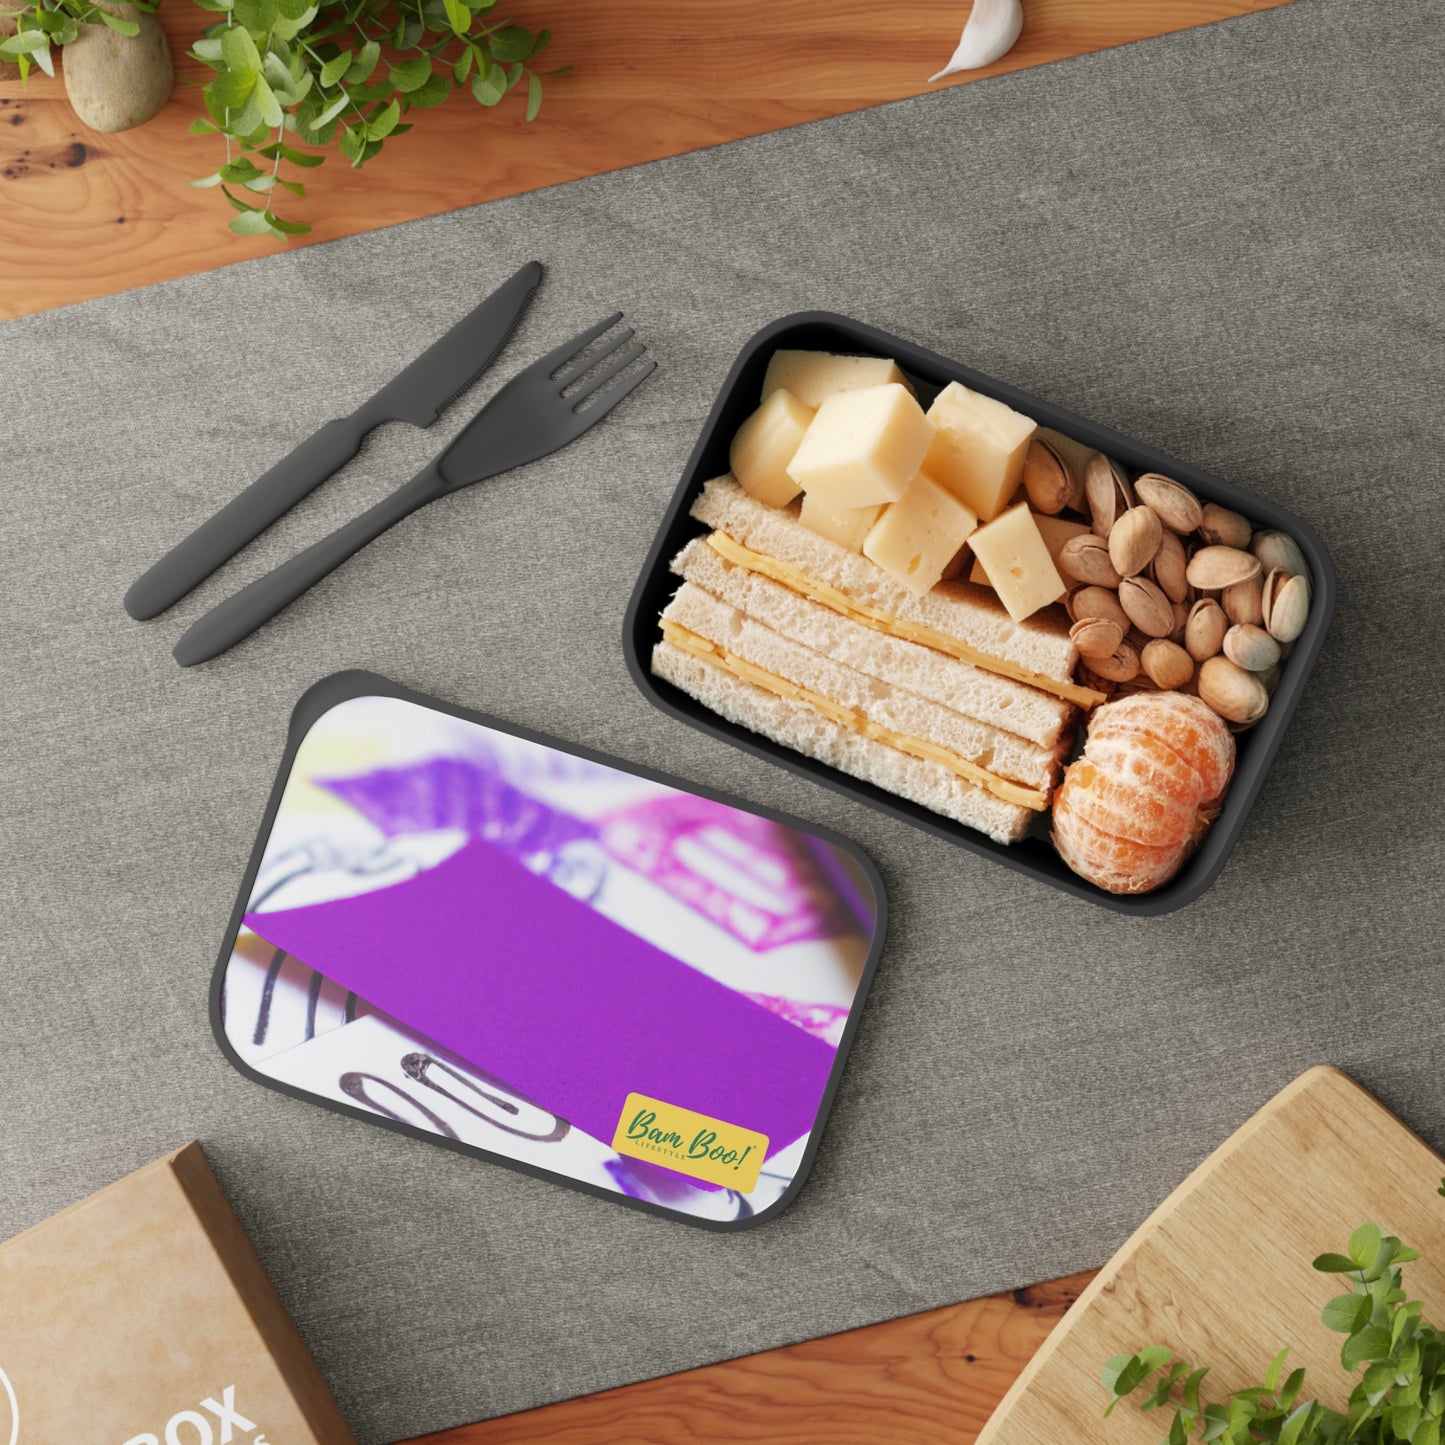 "Abstract Emotions" - Bam Boo! Lifestyle Eco-friendly PLA Bento Box with Band and Utensils